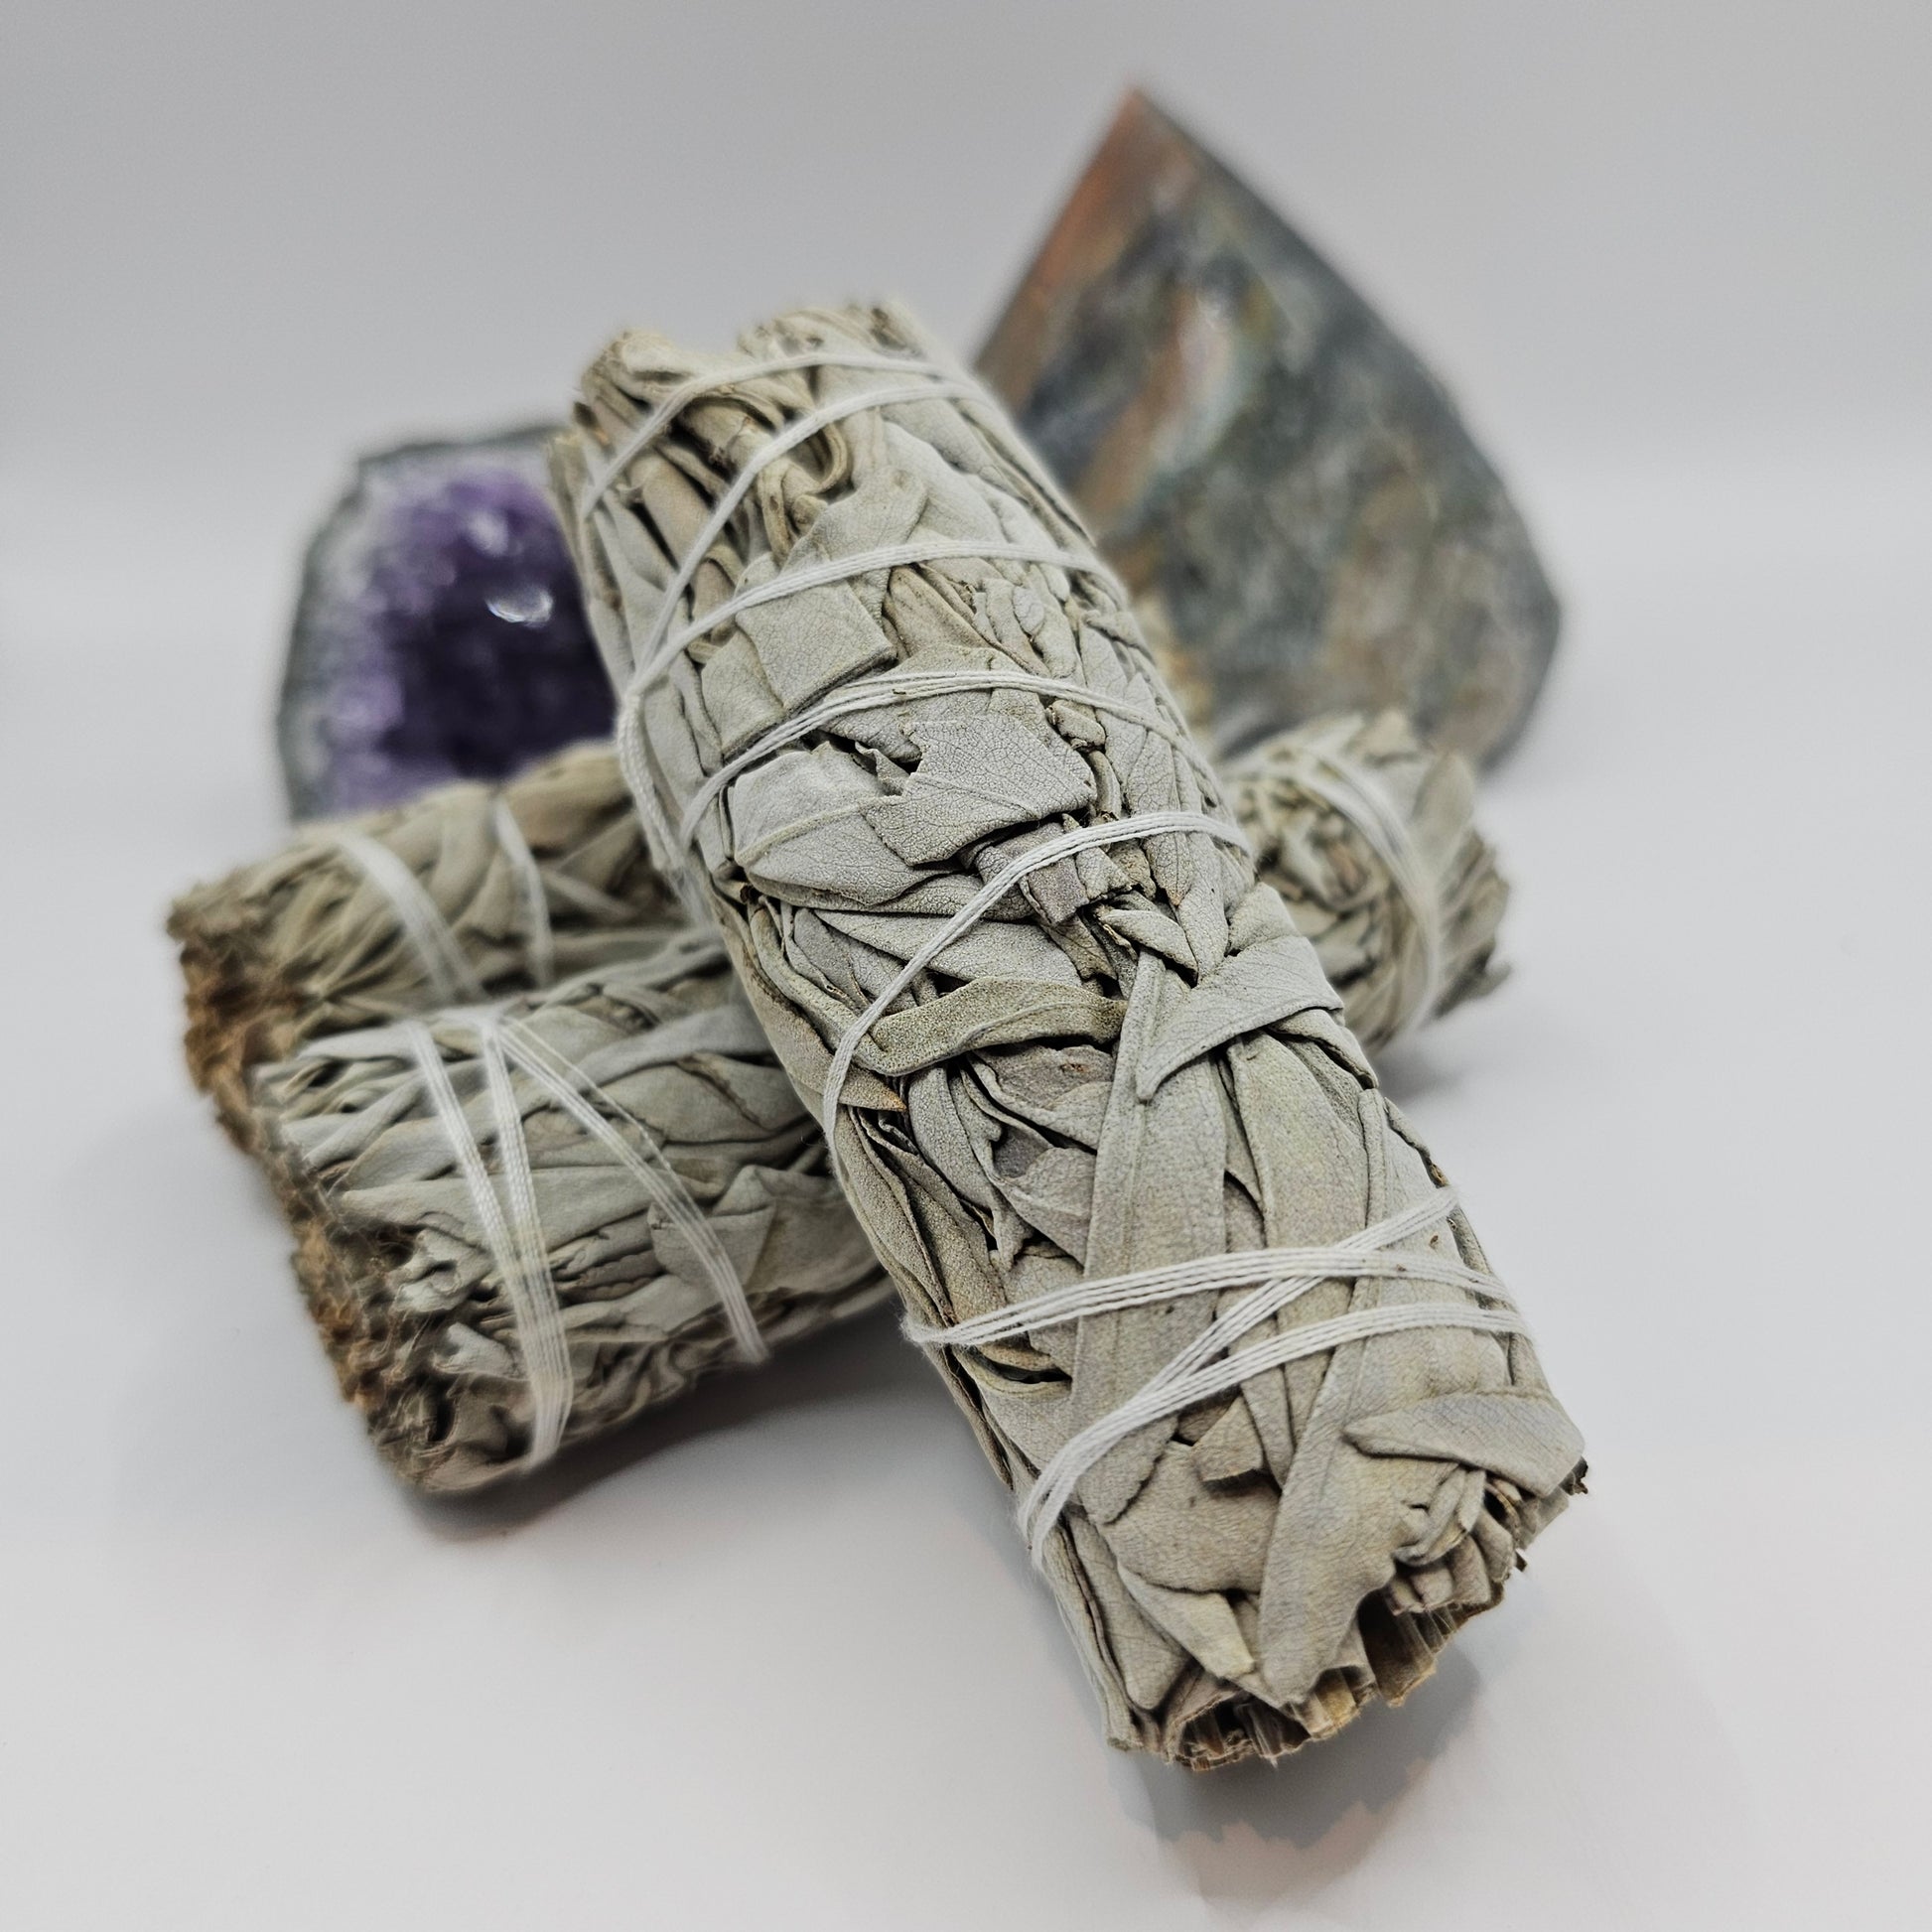 Medium Sage Smudge Stick Approx. 10cm length & 3.5-4cm width | Birthday Gifts, Anniversary Gifts, Valentine's Day, Christmas, Easter, Eid, Mother's Day, Diwali, Hannukah, Women's, Girl's, Gifts for her, Gifts for Girlfriend, Gifts for Mom, Gifts for Mum, Gifts for Friend, Handmade Gifts, Handmade Jewelry, New Year's Eve, Graduation, Boho, Hippie, Minimalist, Gemstone, Crystal, Crystal Healing, Cleansing, Smudging, Protection, Remove negativity